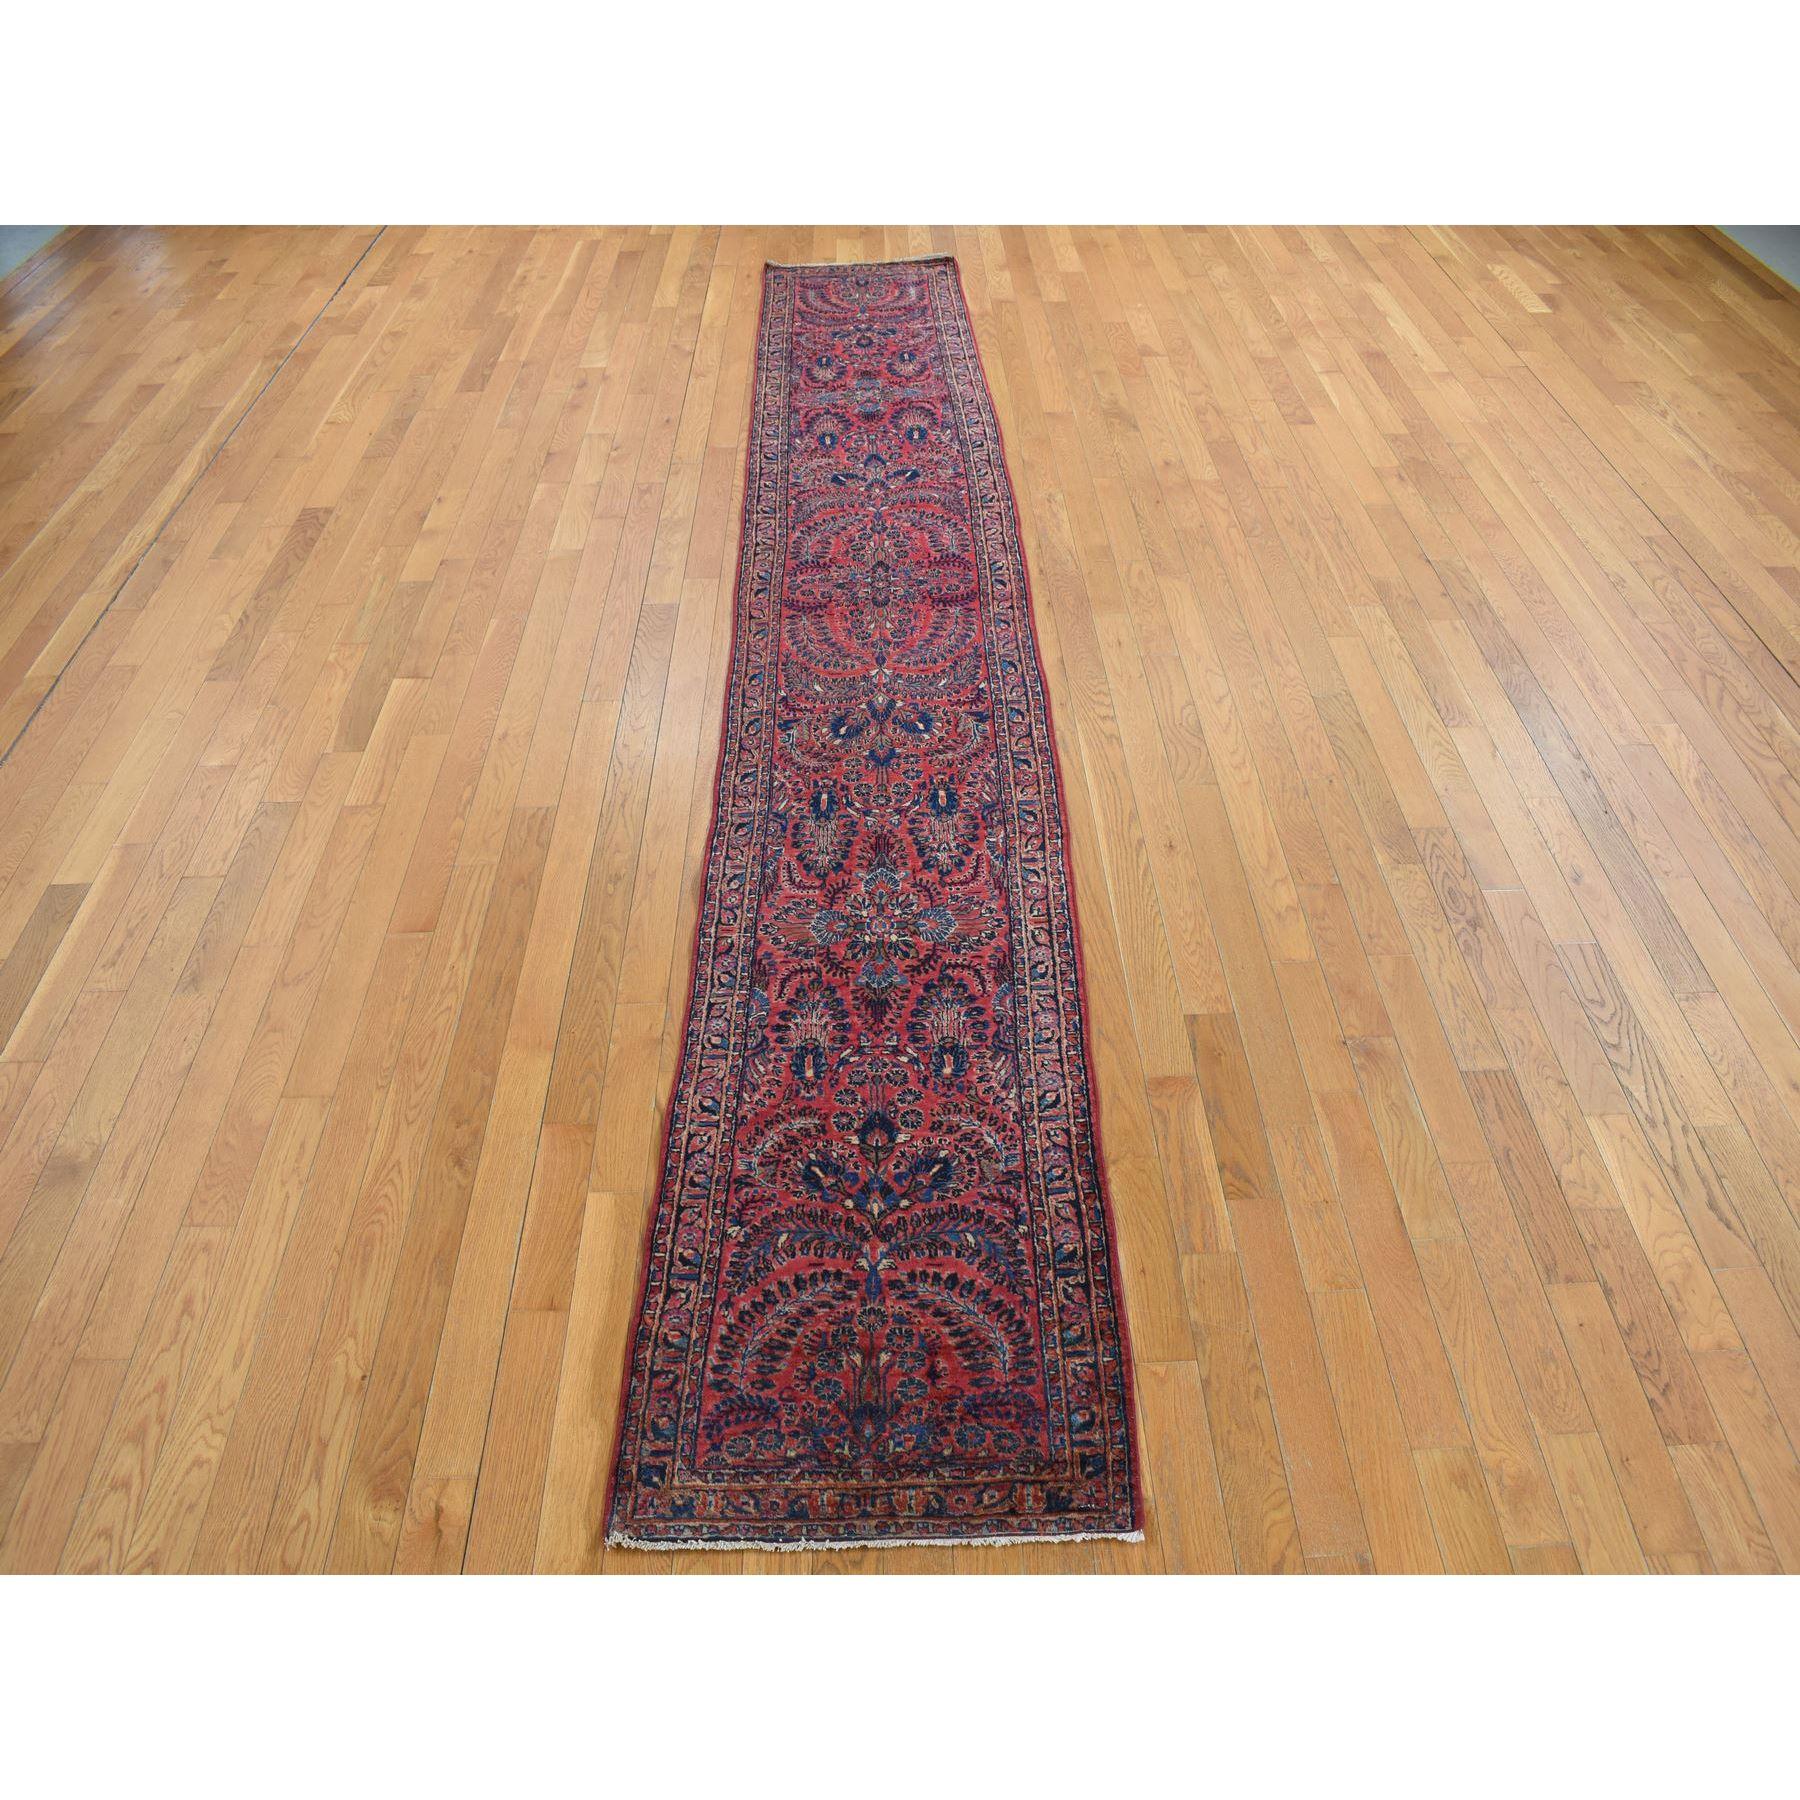 This fabulous Hand-Knotted carpet has been created and designed for extra strength and durability. This rug has been handcrafted for weeks in the traditional method that is used to make
Exact Rug Size in Feet and Inches : 2'2